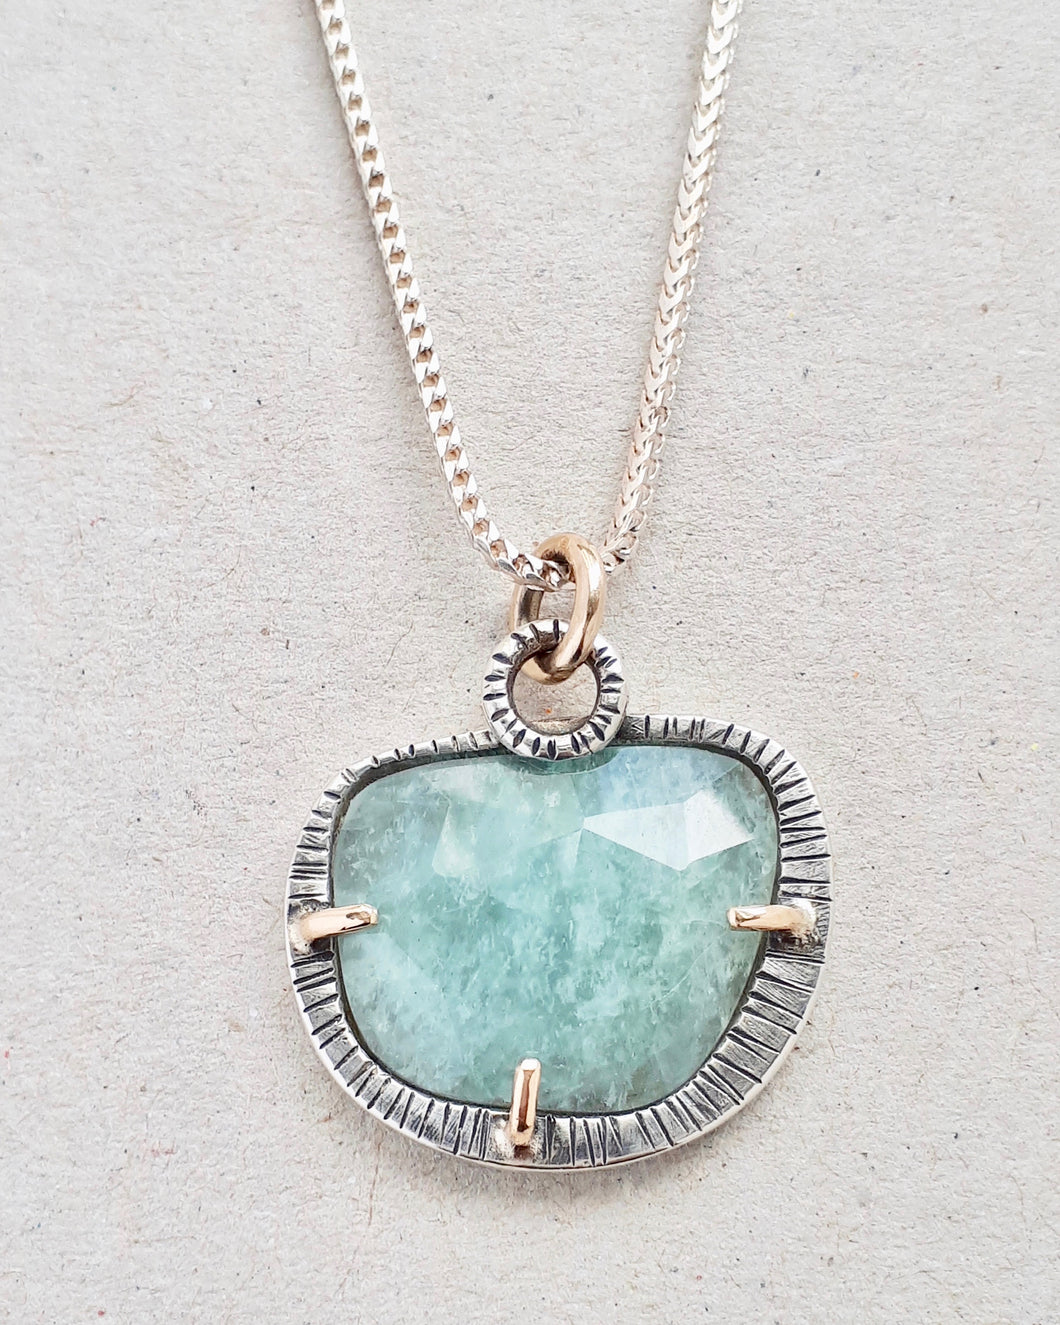 rose cut aquamarine in sterling silver and 10k gold pendant with sterling silver chain. front close up view.